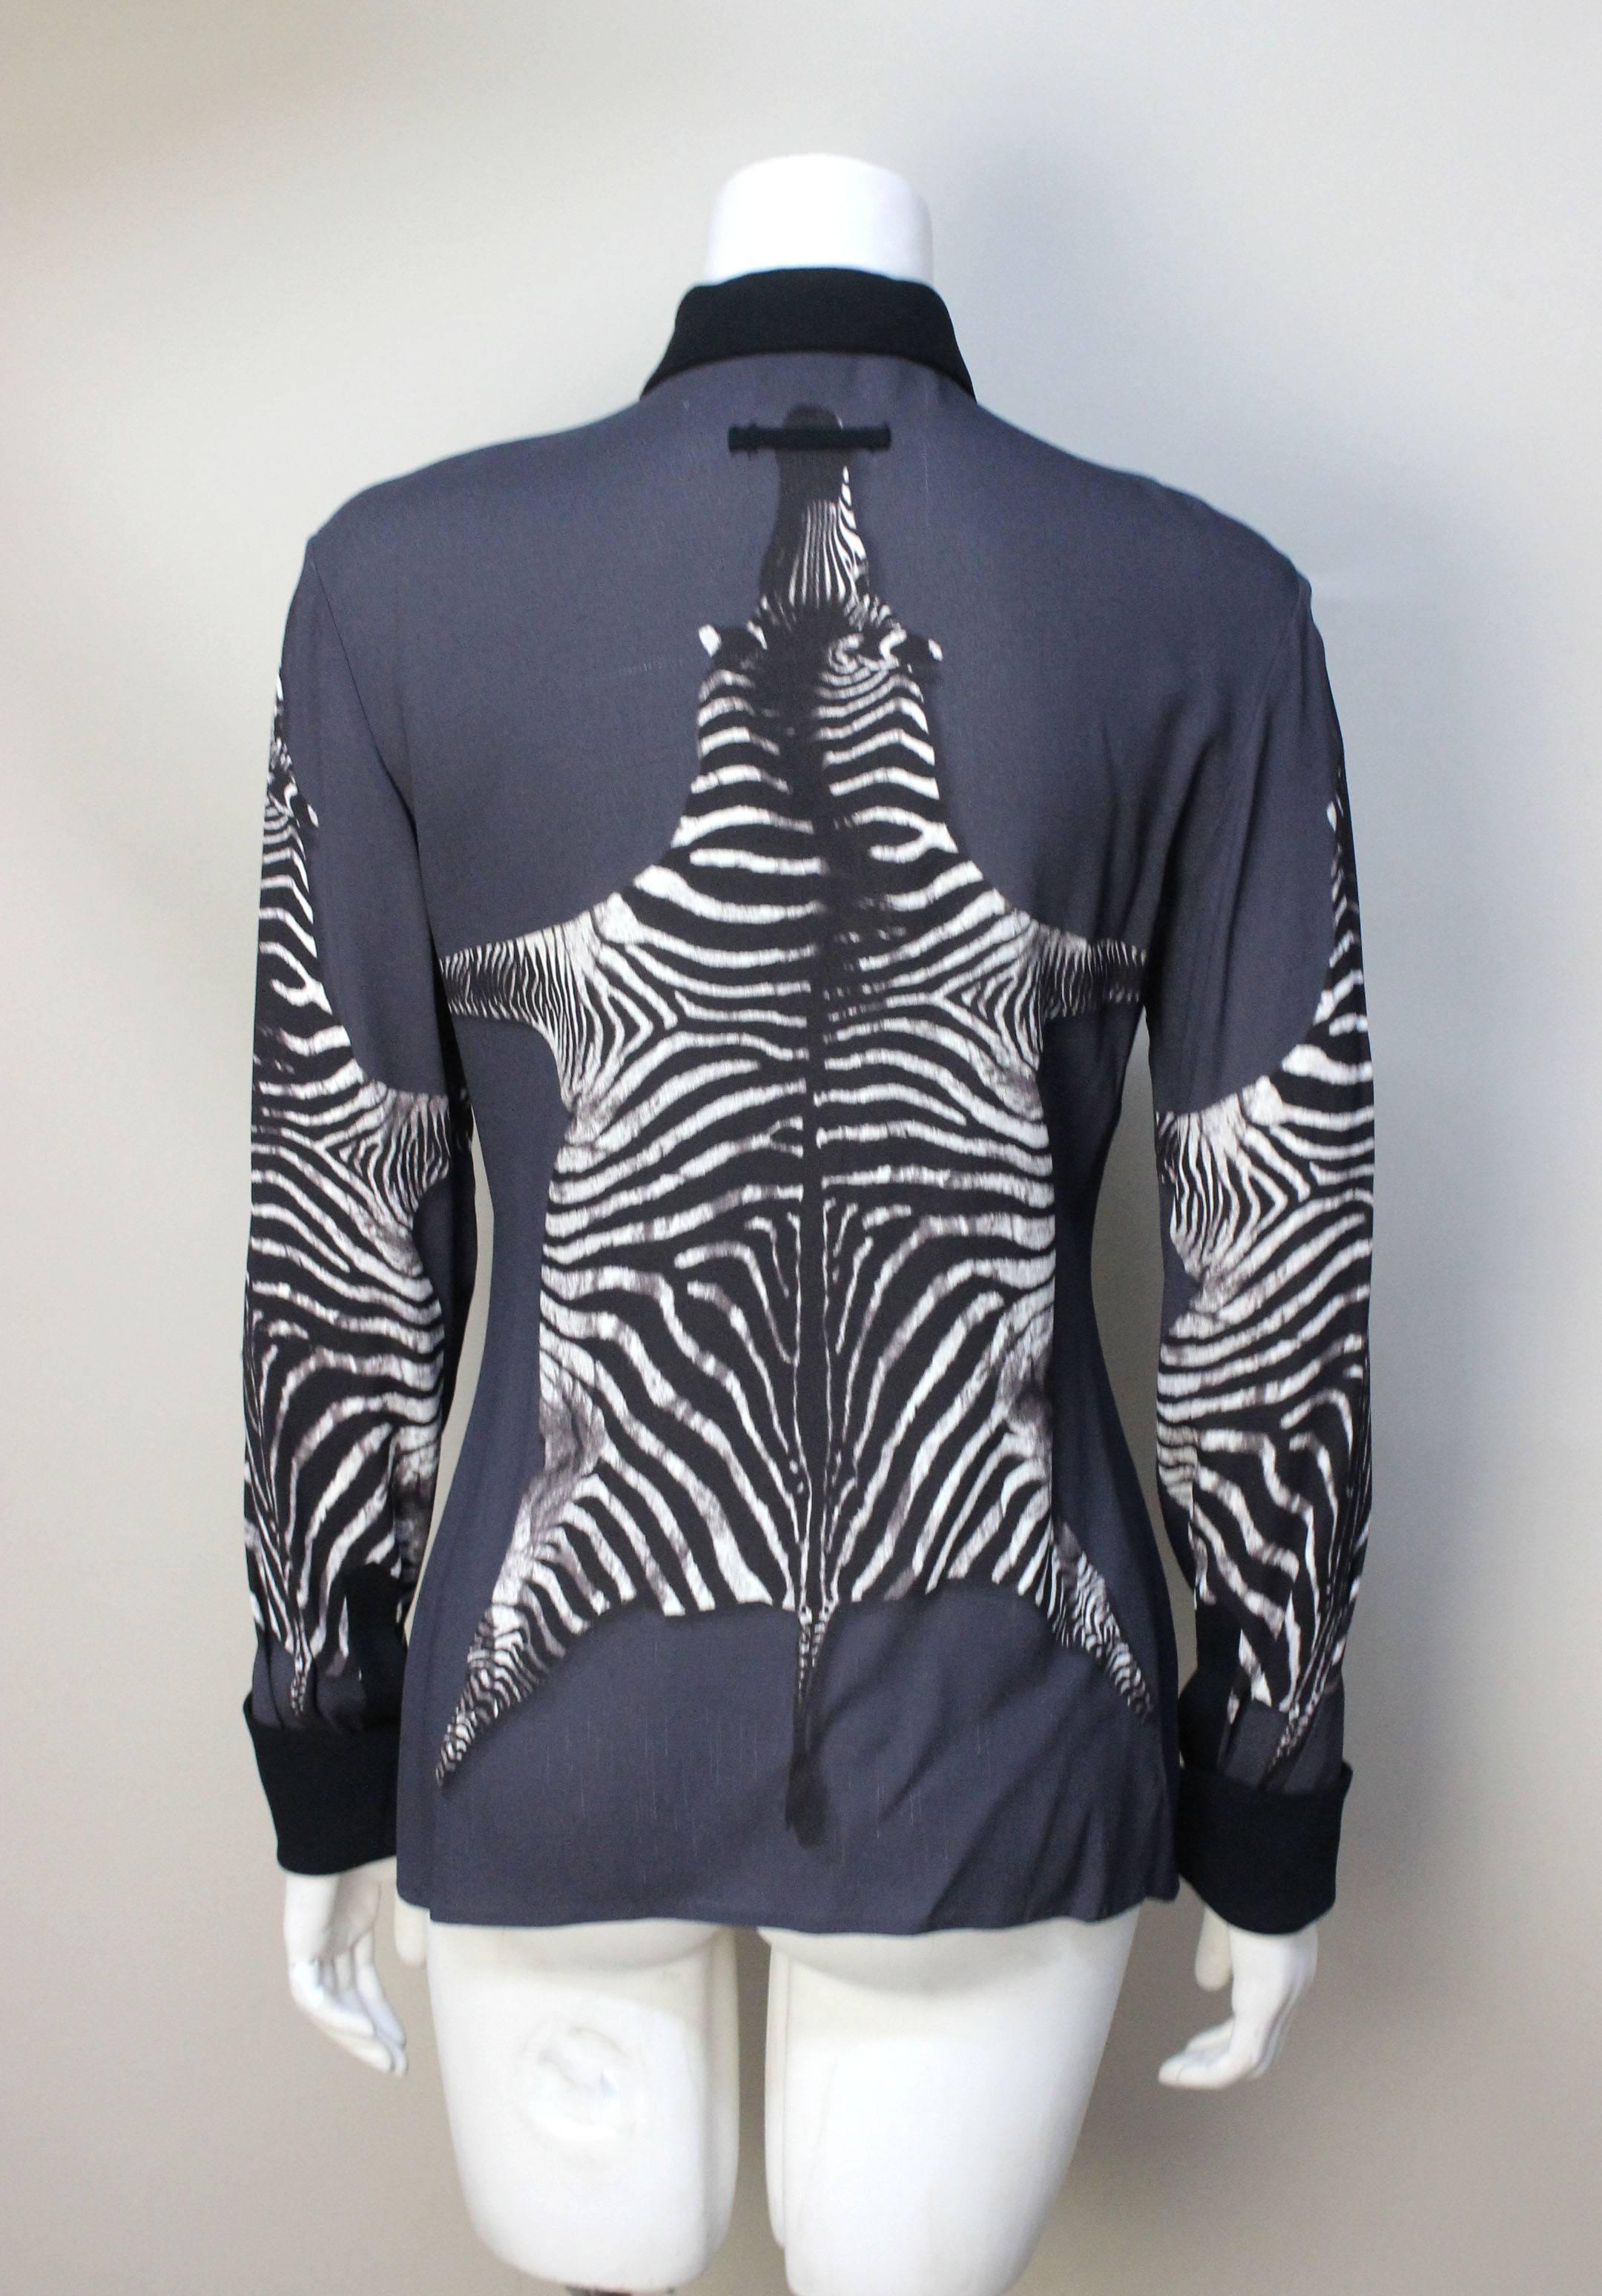 Black Jean Paul Gaultier Sheer Blouse with Zebra Graphic For Sale